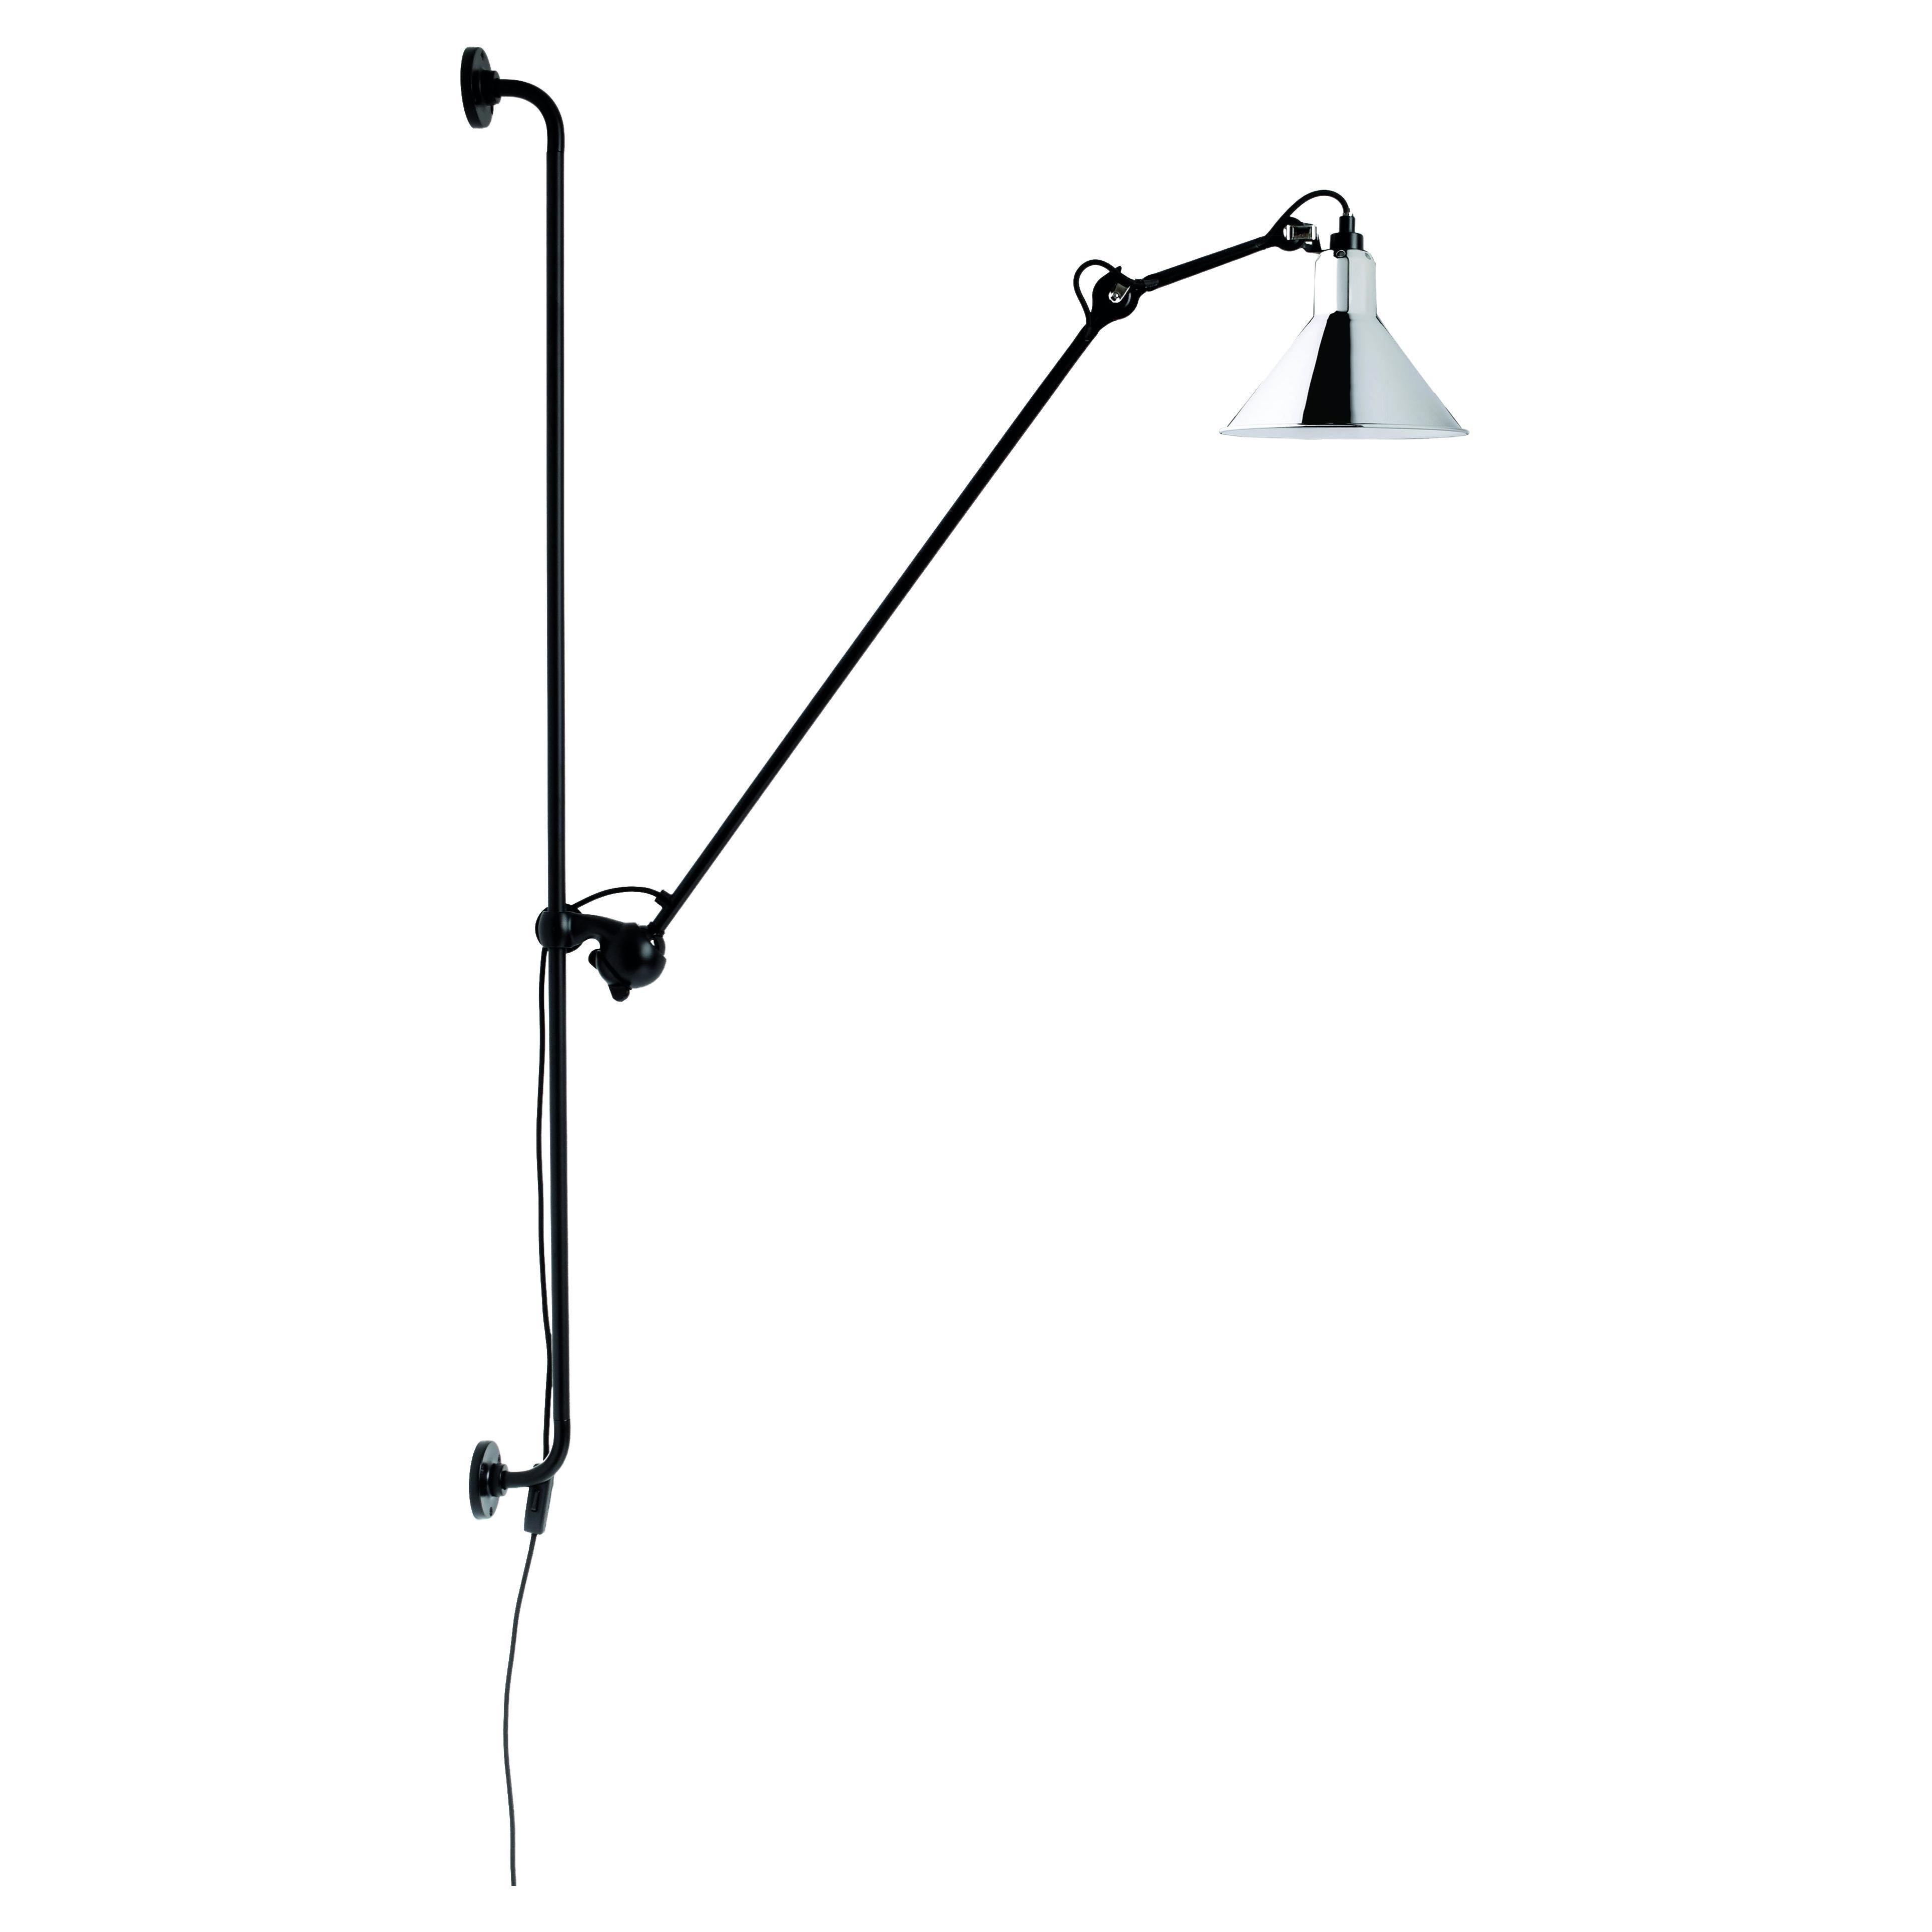 DCW Editions La Lampe Gras N°214 Conic Wall Lamp in Black Arm and Chrome Shade